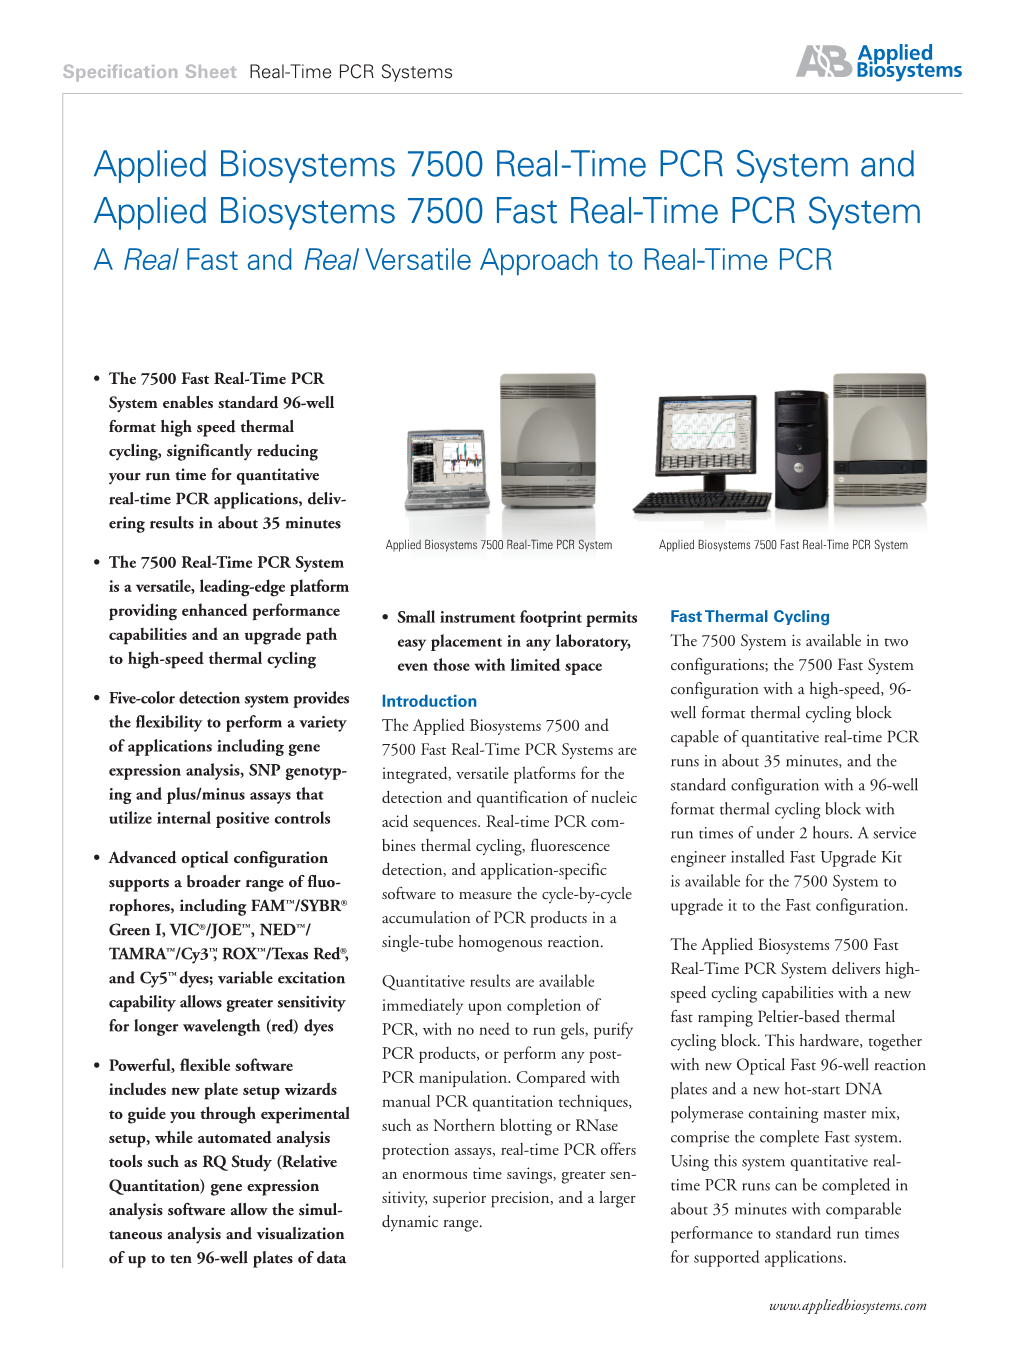 Applied Biosystems 7500 Real-Time PCR System and Applied Biosystems 7500 Fast Real-Time PCR System a Real Fast and Real Versatile Approach to Real-Time PCR